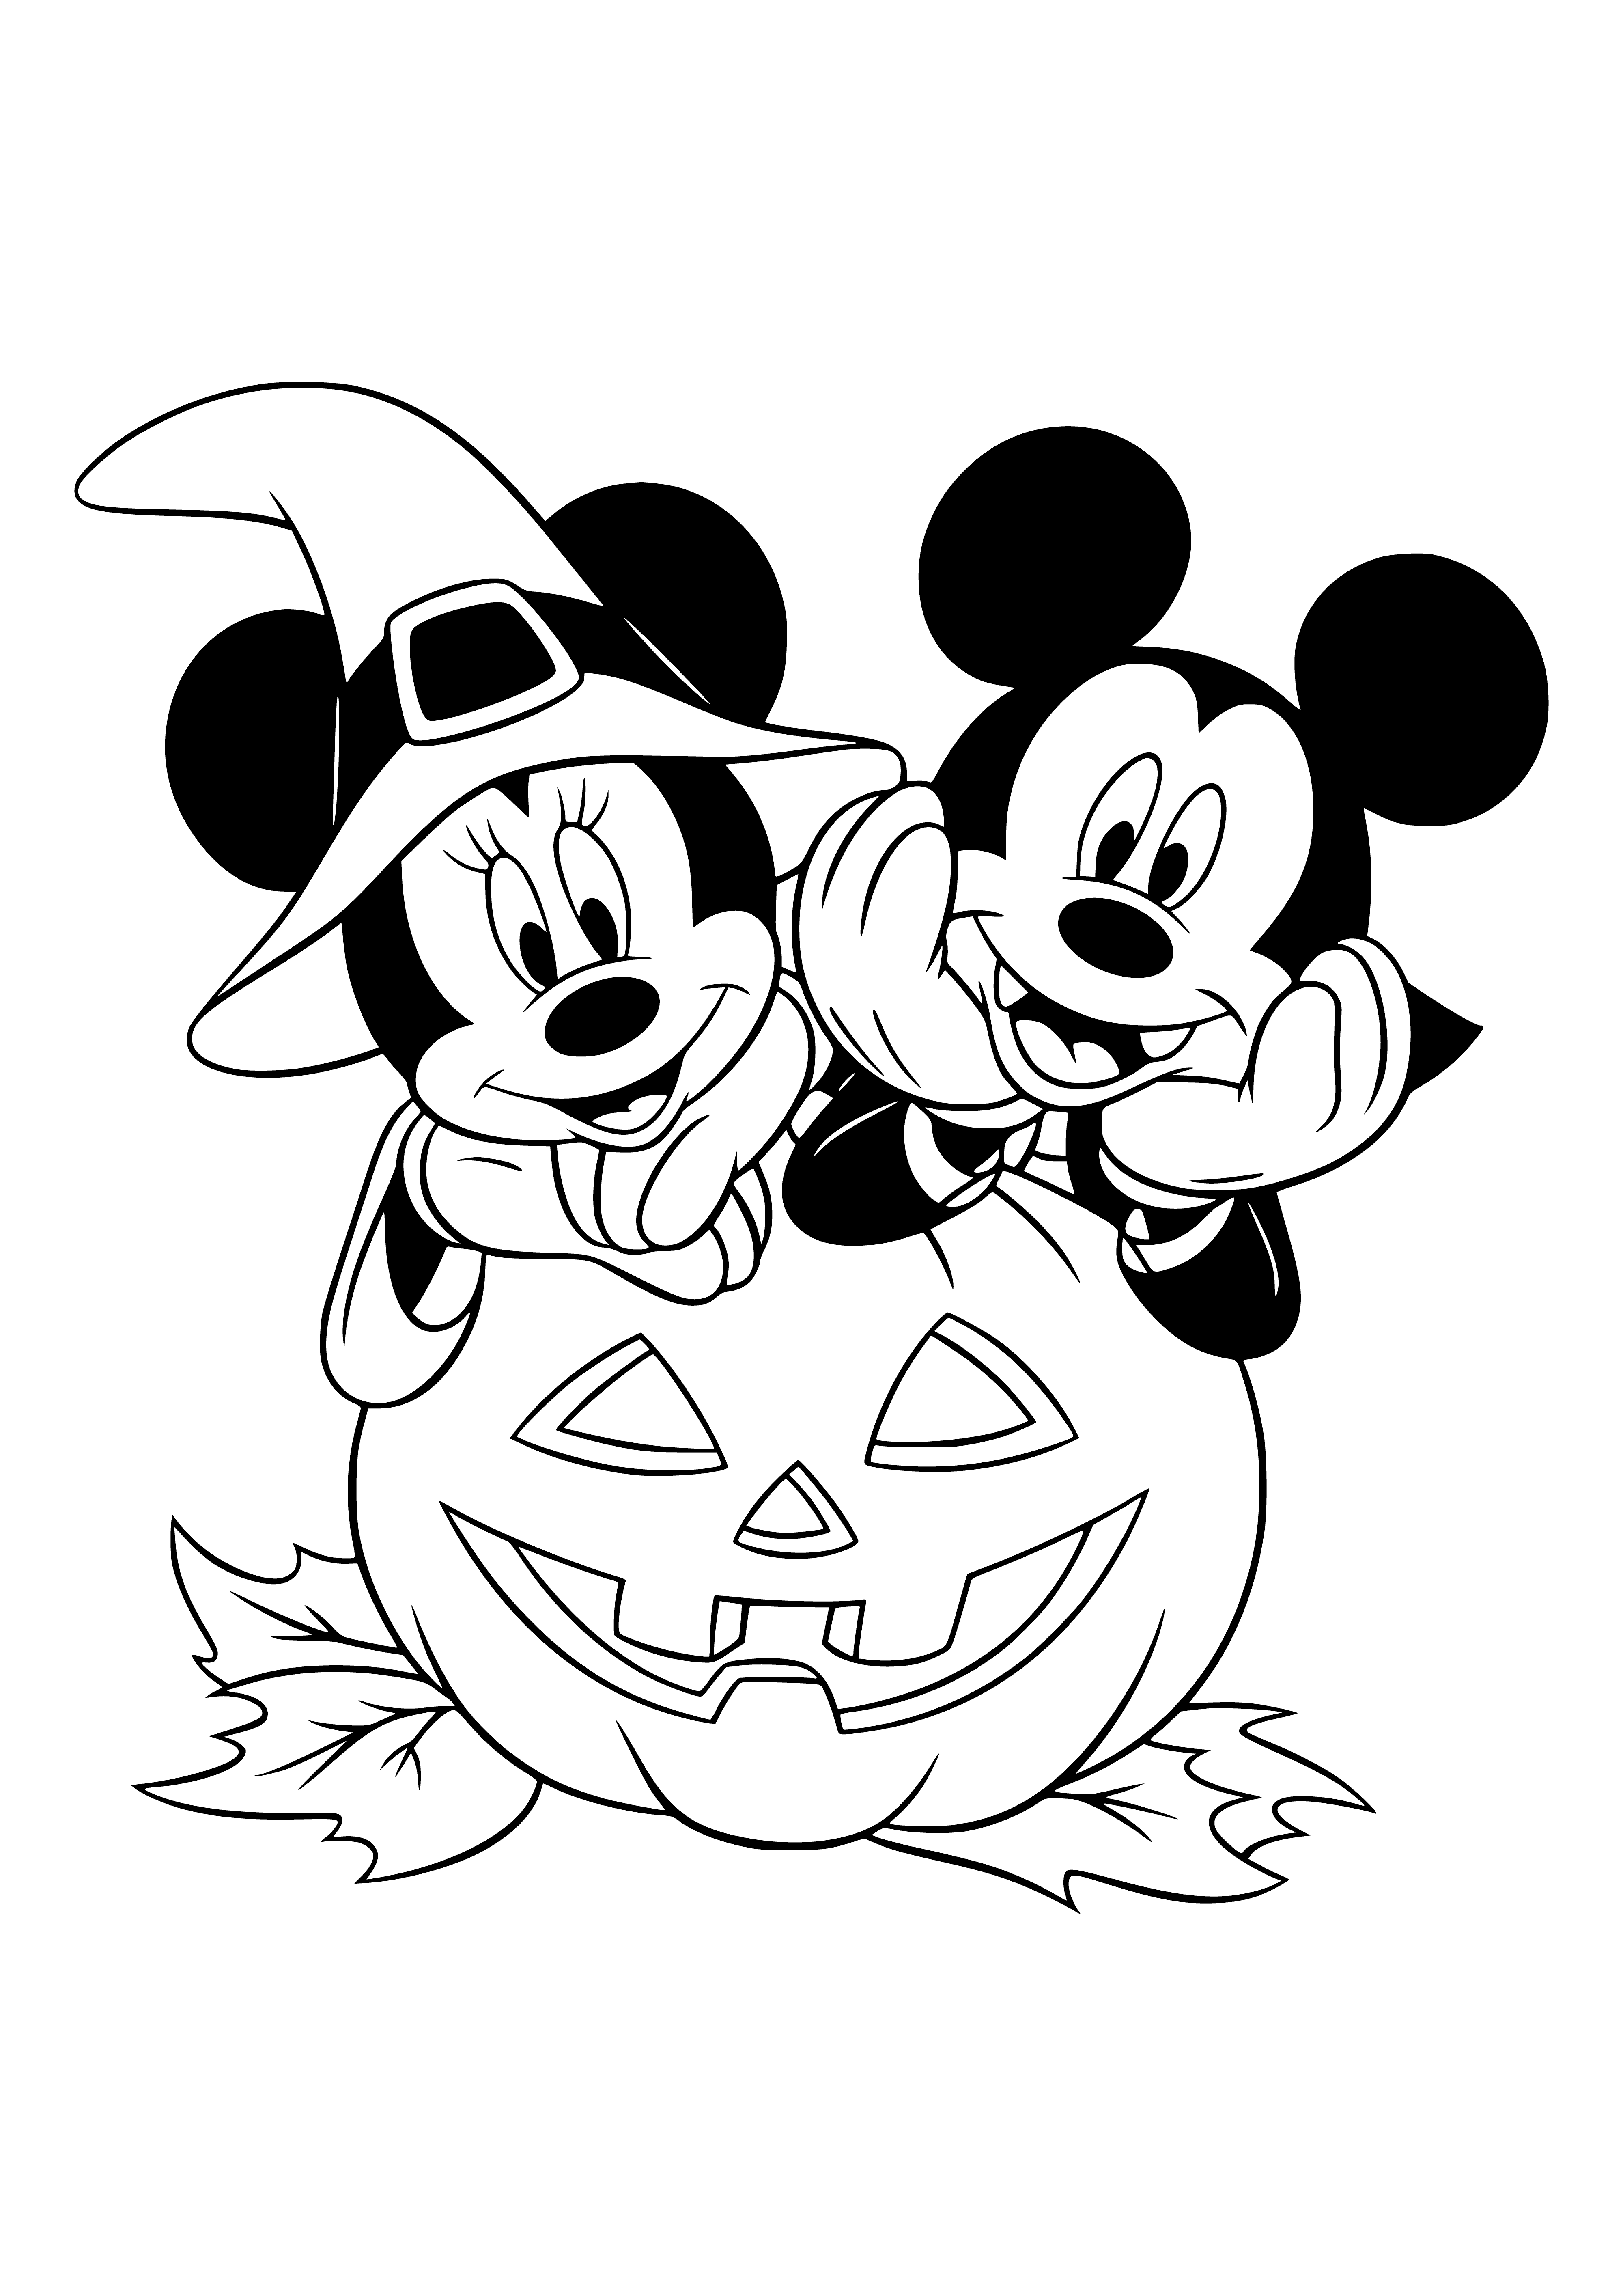 coloring page: Minnie and Mickey Mouse celebrate Halloween, wearing witch hat & cape and stripey dress with cape, while a black cat joins the fun.